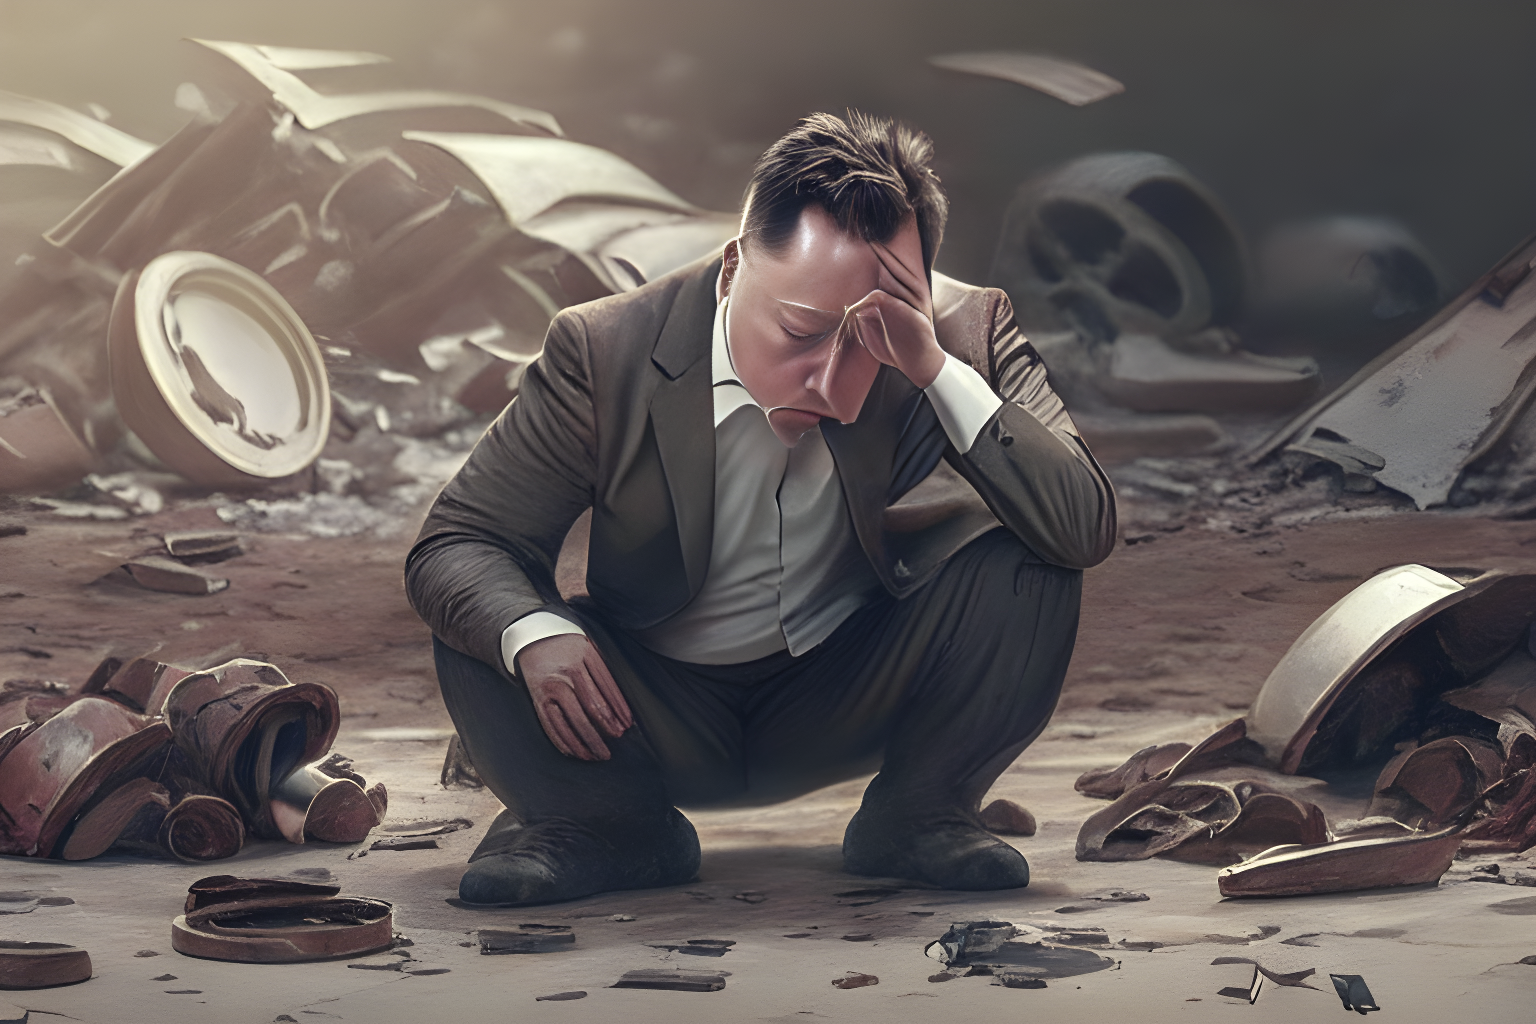 elon musk on his knees looking at the remains of his company